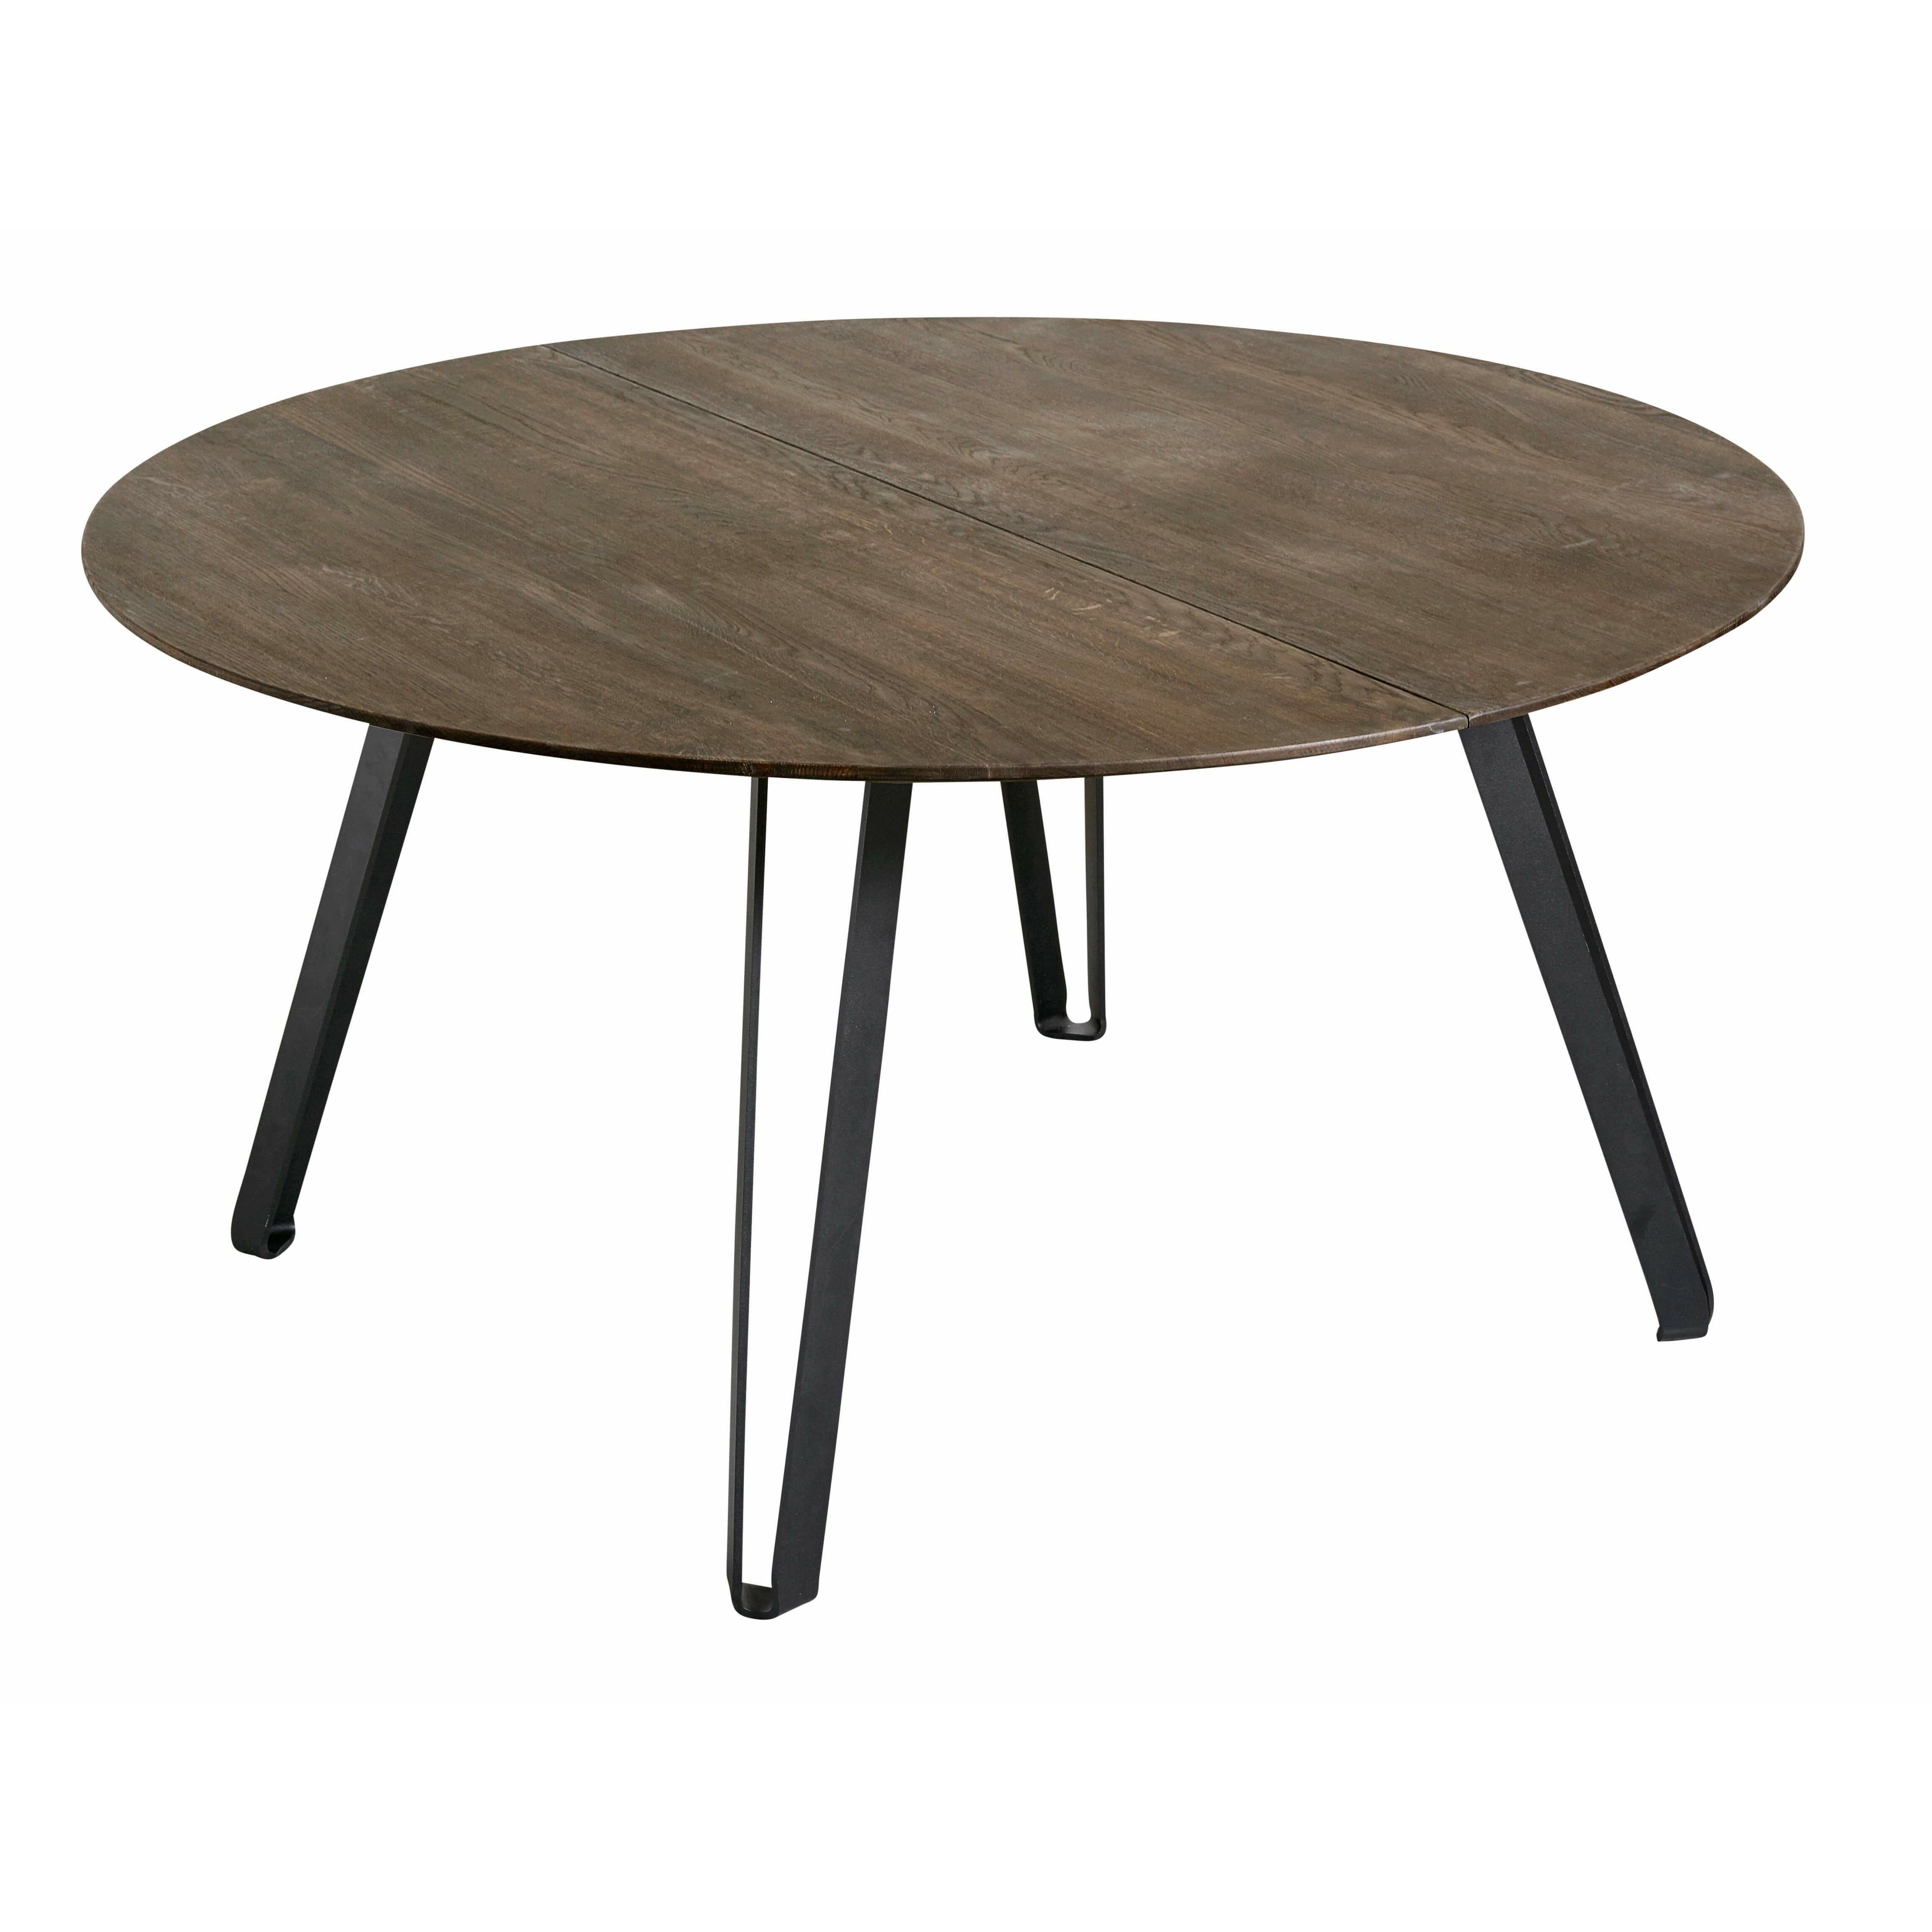 Muubs Space Dining Table Round Smoked Oak, 150cm